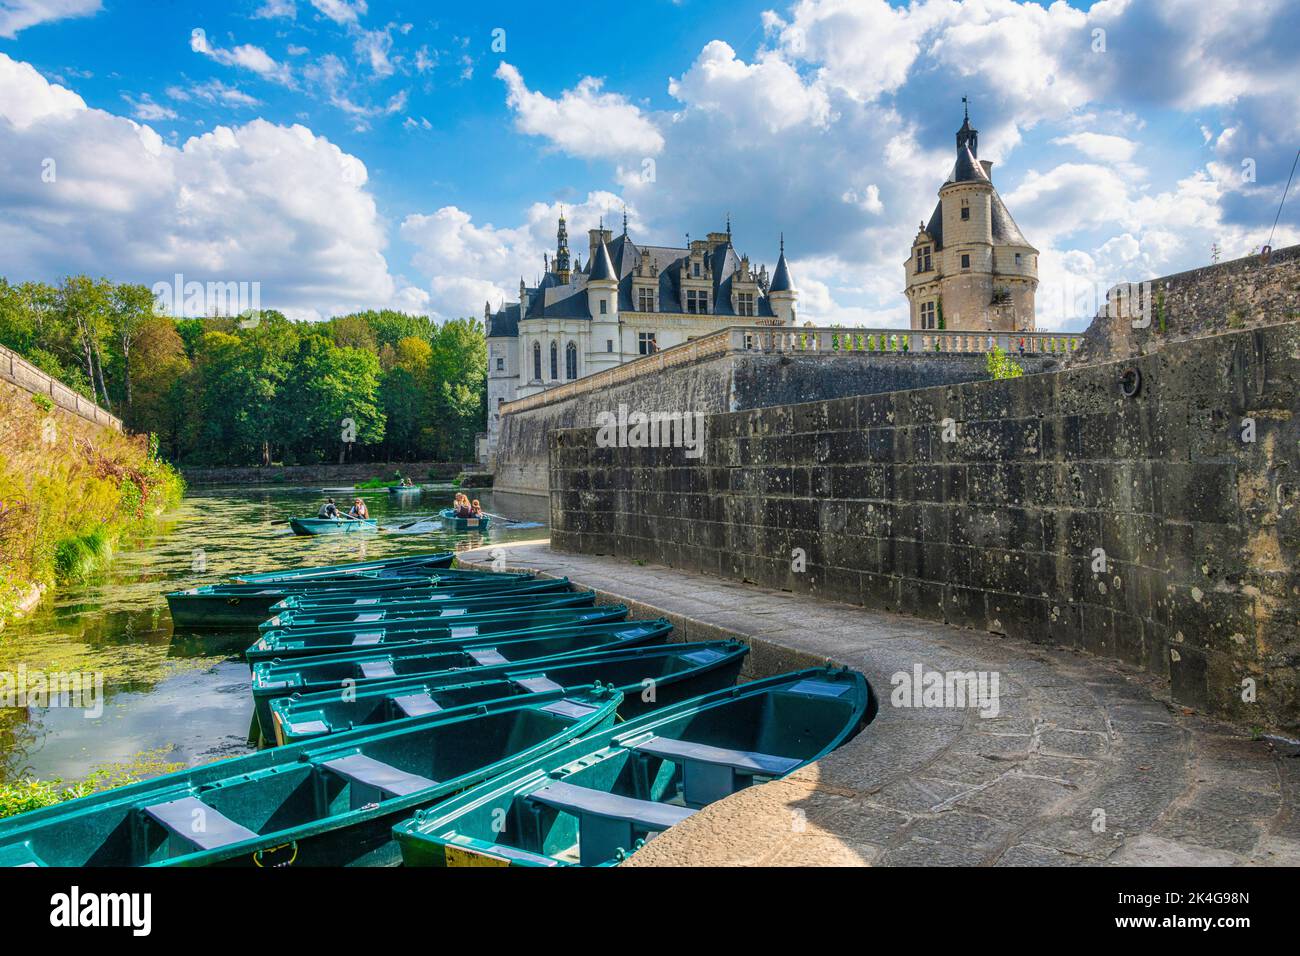 The Chateau de Chenonceau is a castle near the small village of Chenonceaux on the River Cher.  Chenonceaux, France Stock Photo